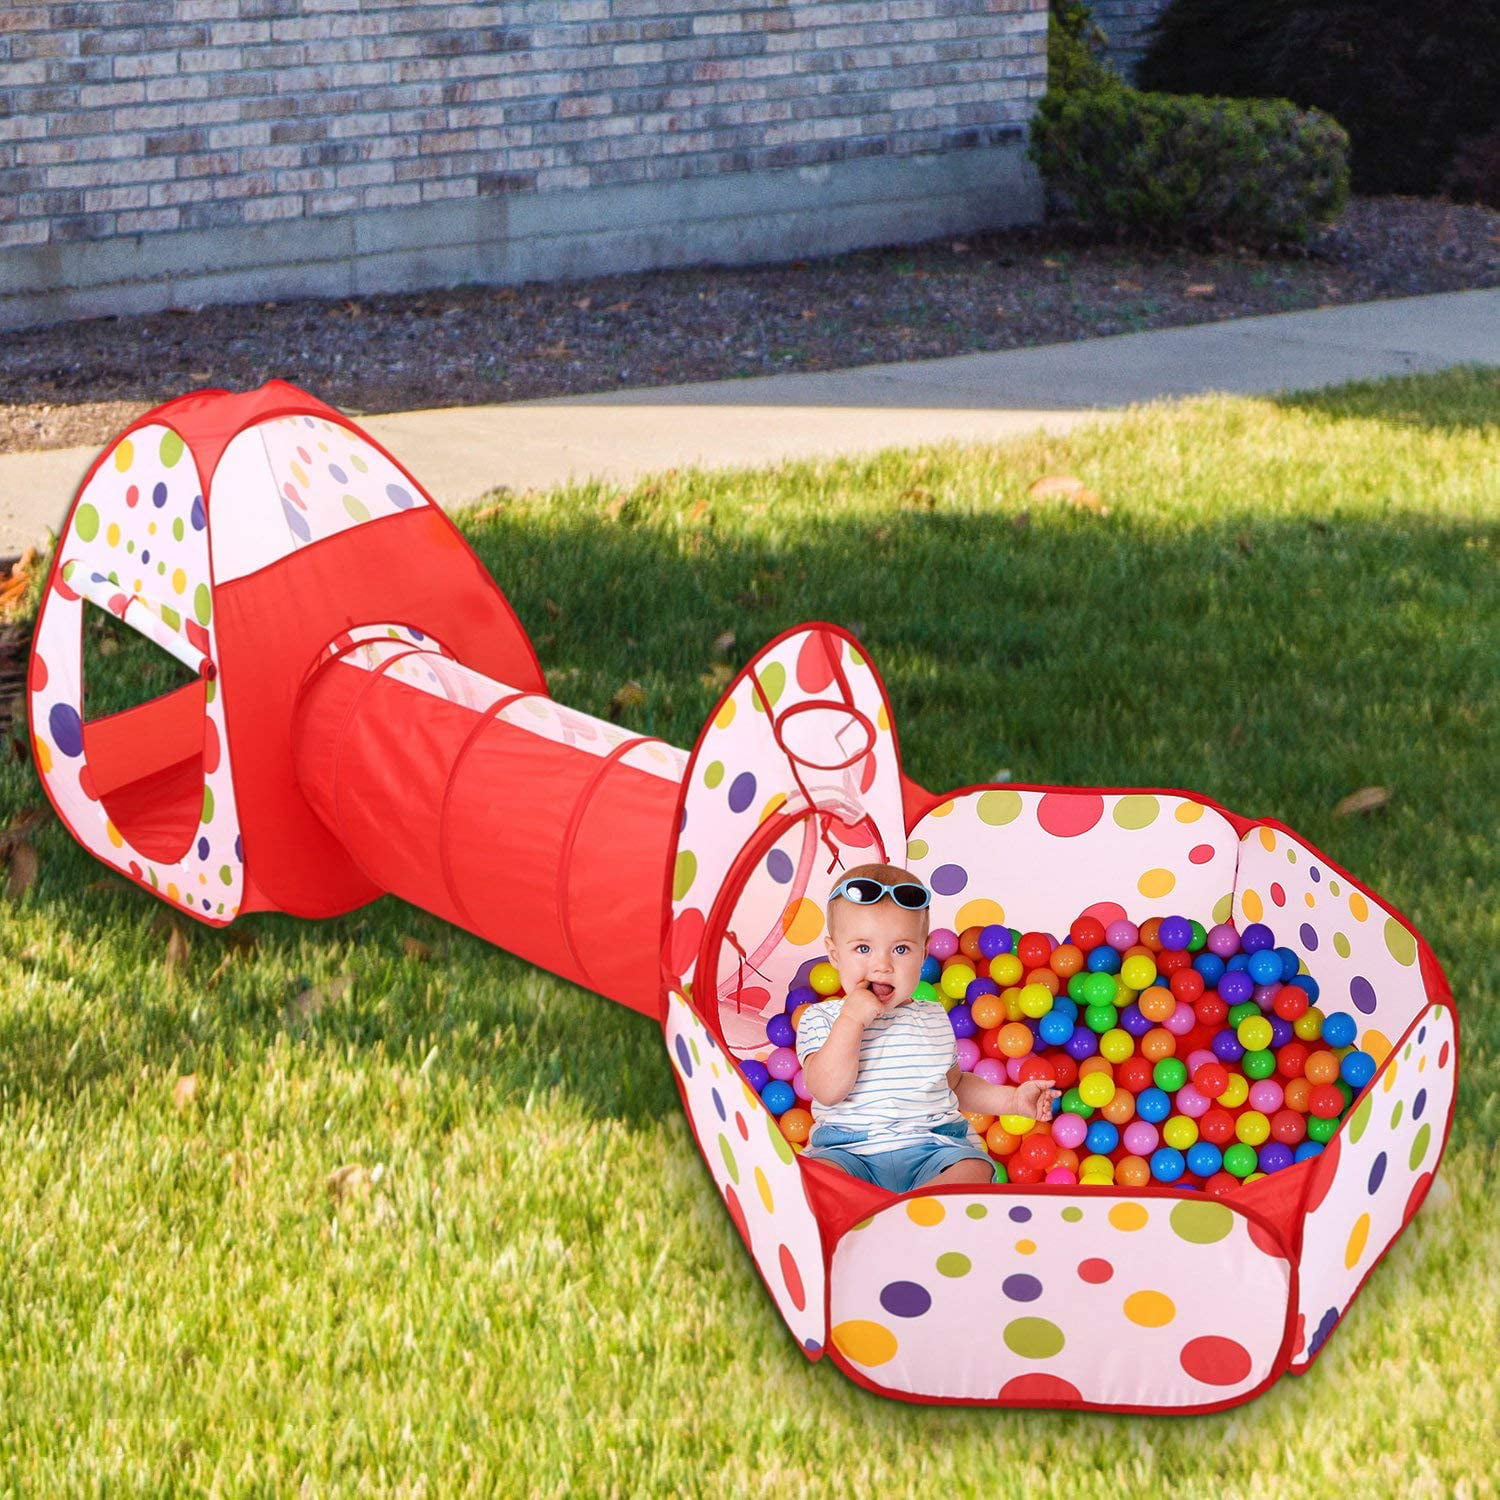 Boy Girl Kids Ball Pit Indoor Play Tent Game House Tunnel Pool Toy Birthday Gift 